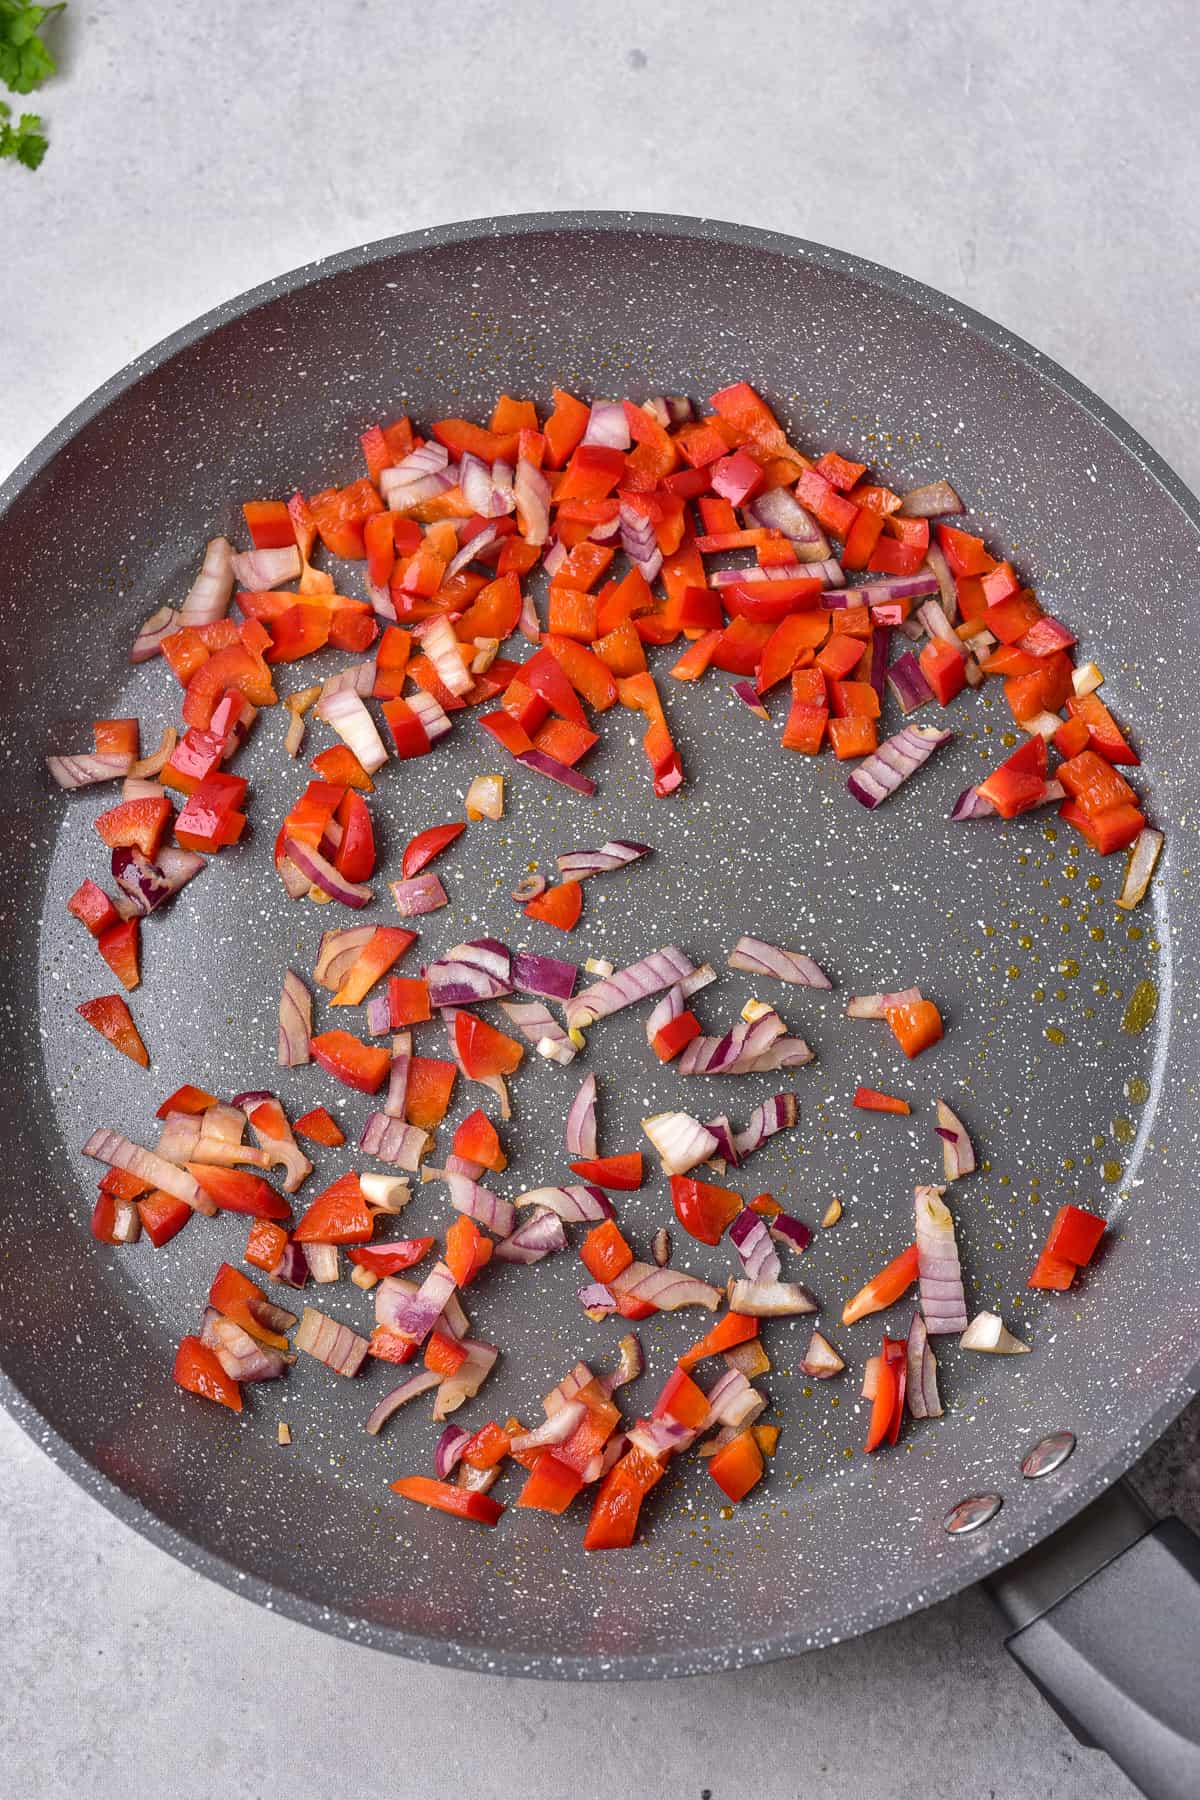 Red pepper and onions in a frying pan.